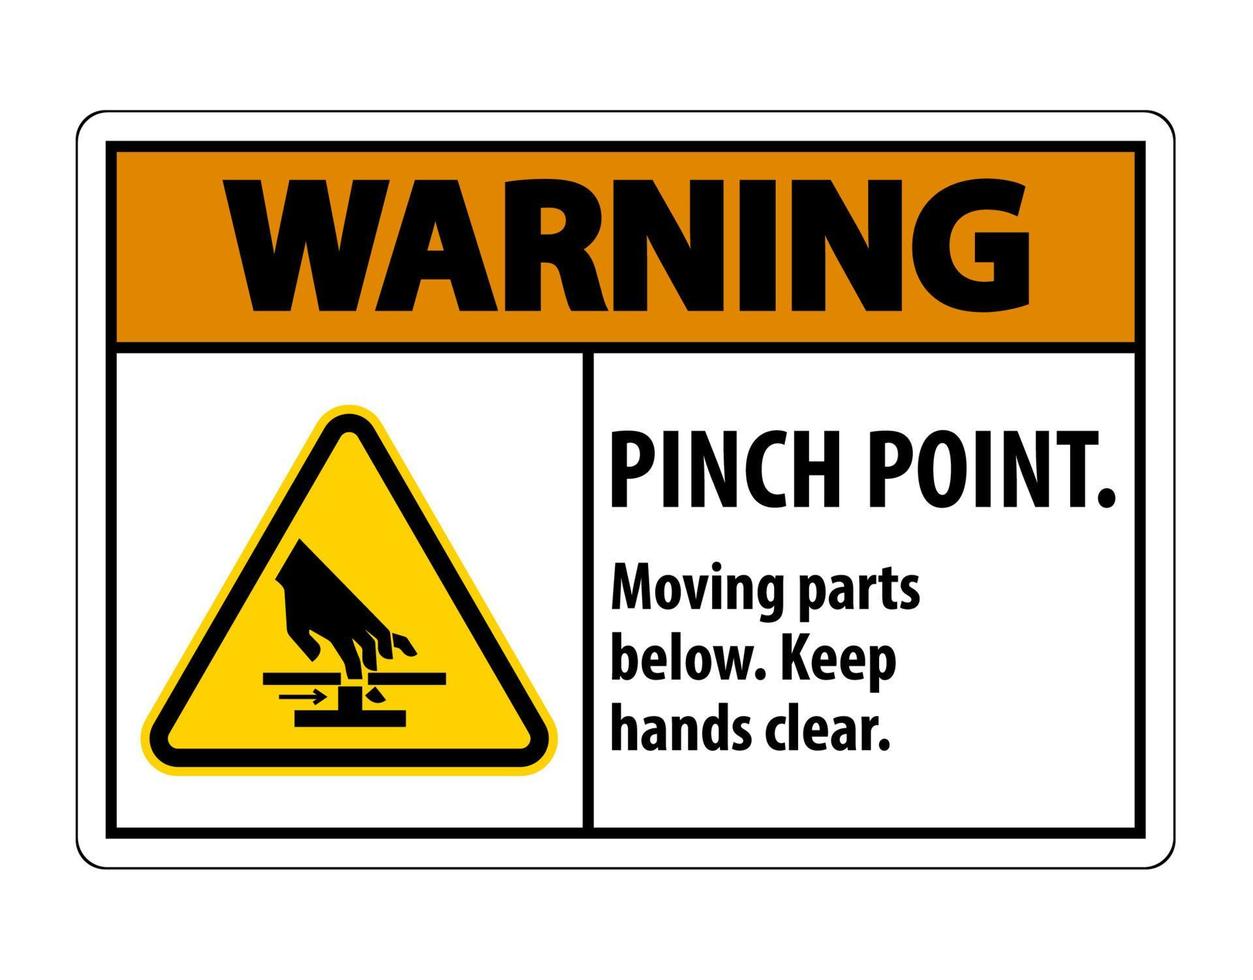 Warning Pinch Point, Moving Parts Below, Keep Hands Clear Symbol Sign Isolate on White Background,Vector Illustration EPS.10 vector